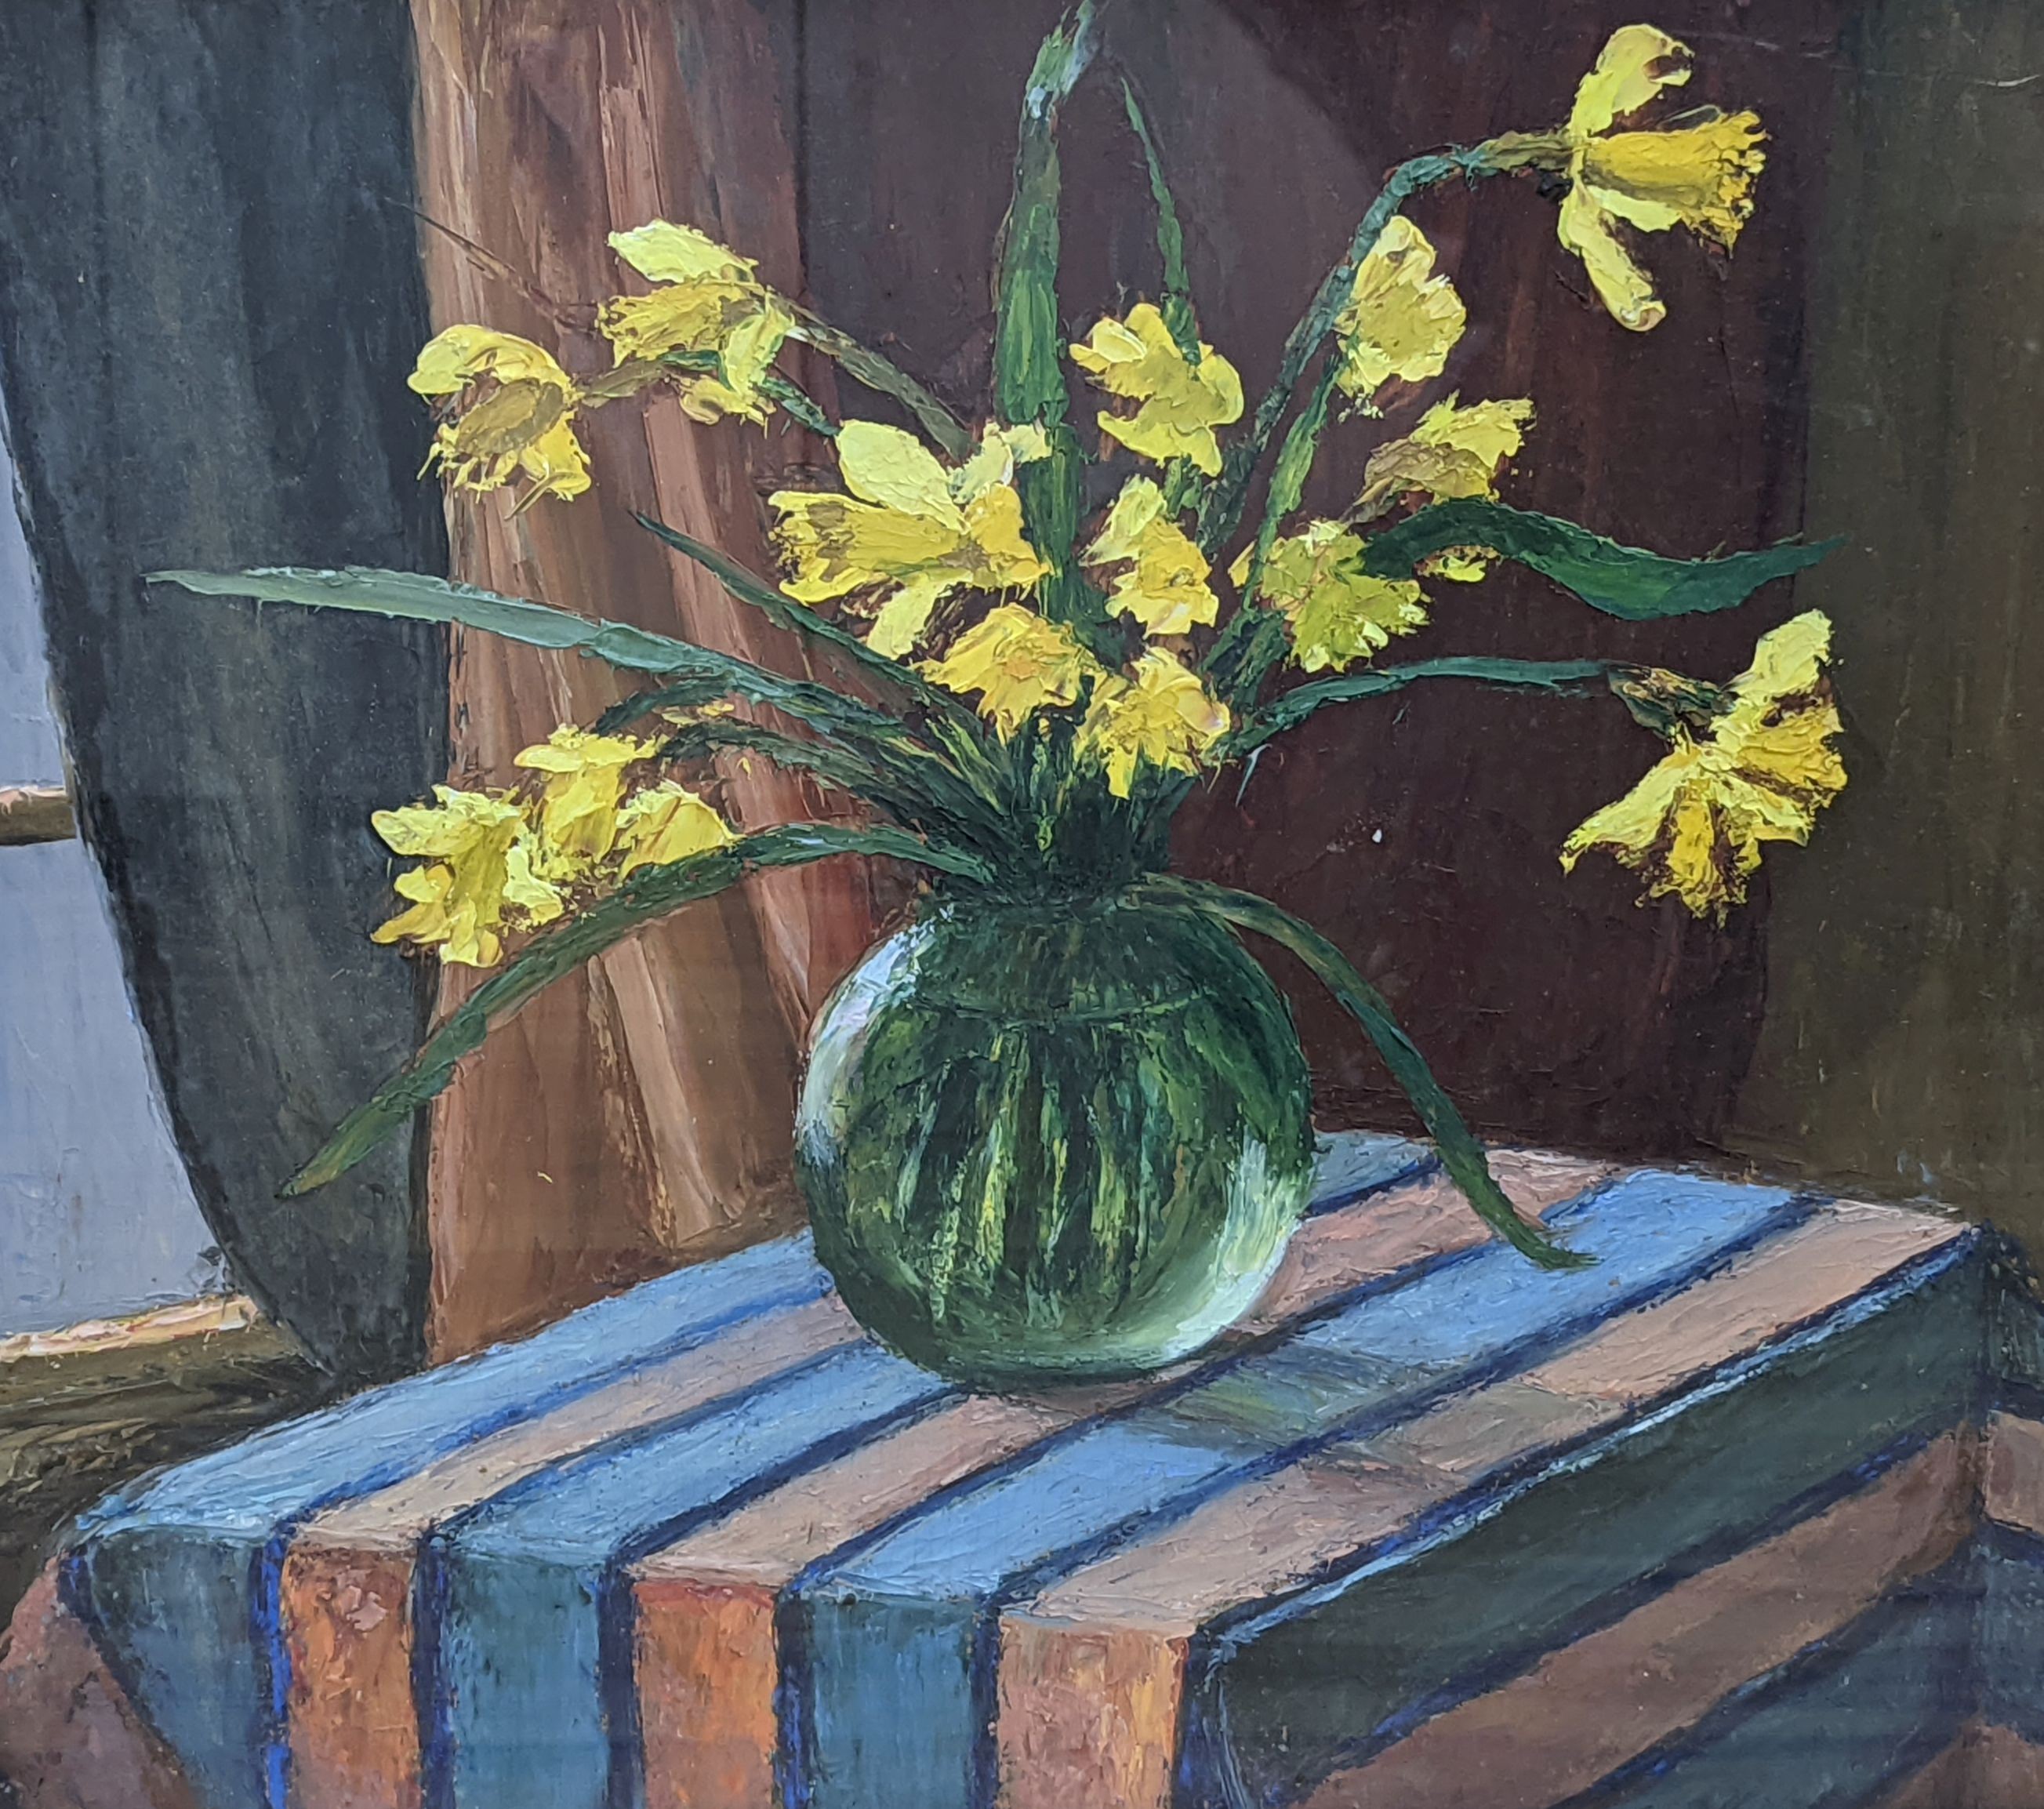 Piero Sansalvadore (1892-1955), oil on board, Still life of Narcissi in a glass vase, inscribed verso and dated 1928, 45 x 50cm